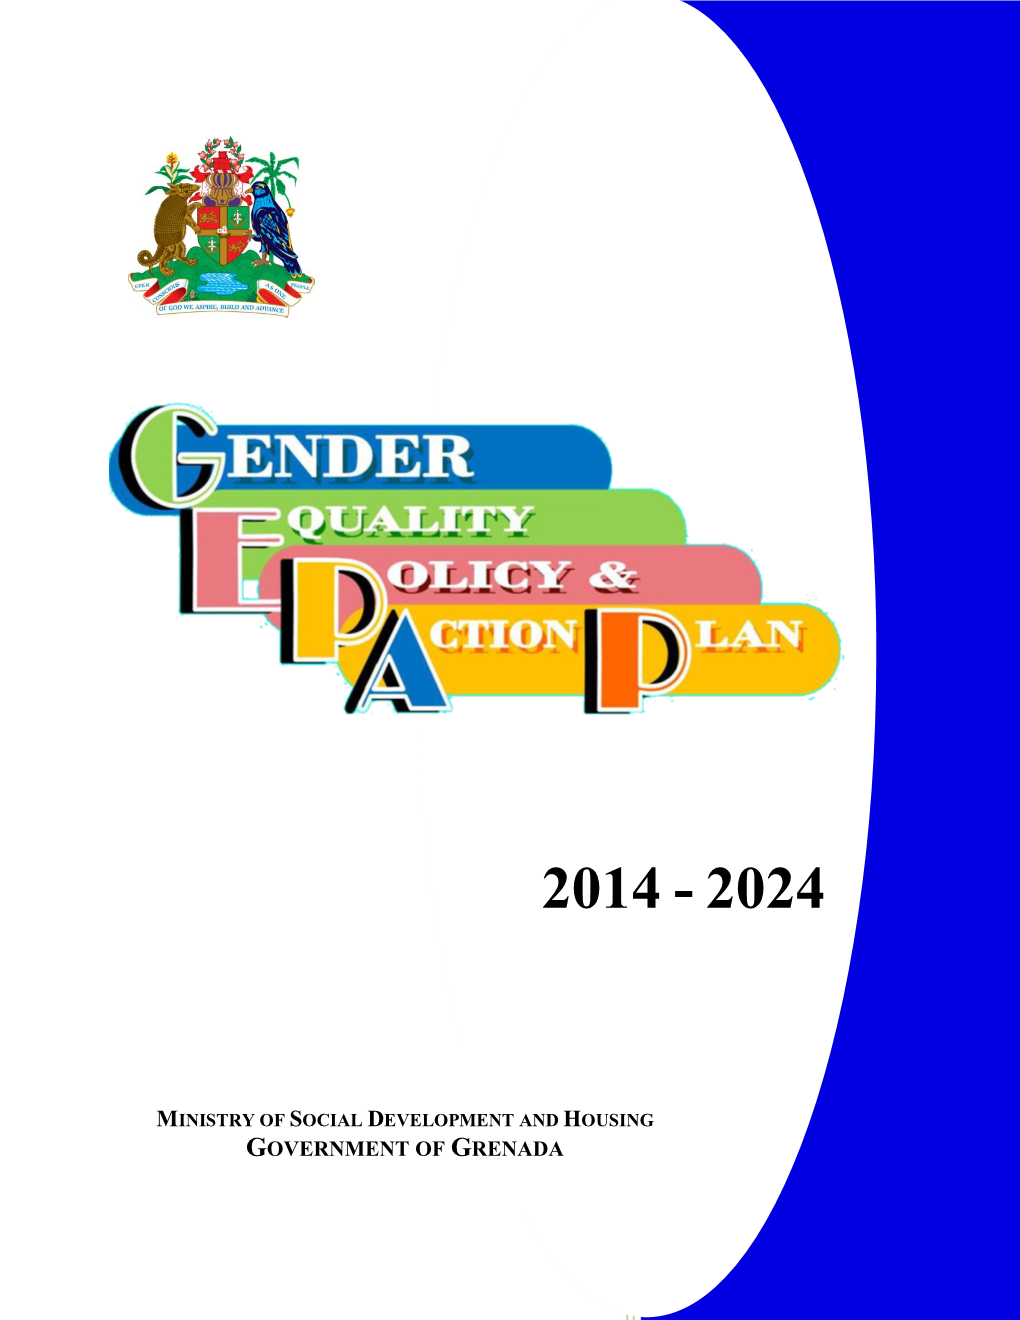 Government of Grenada Gender Equality Policy and Action